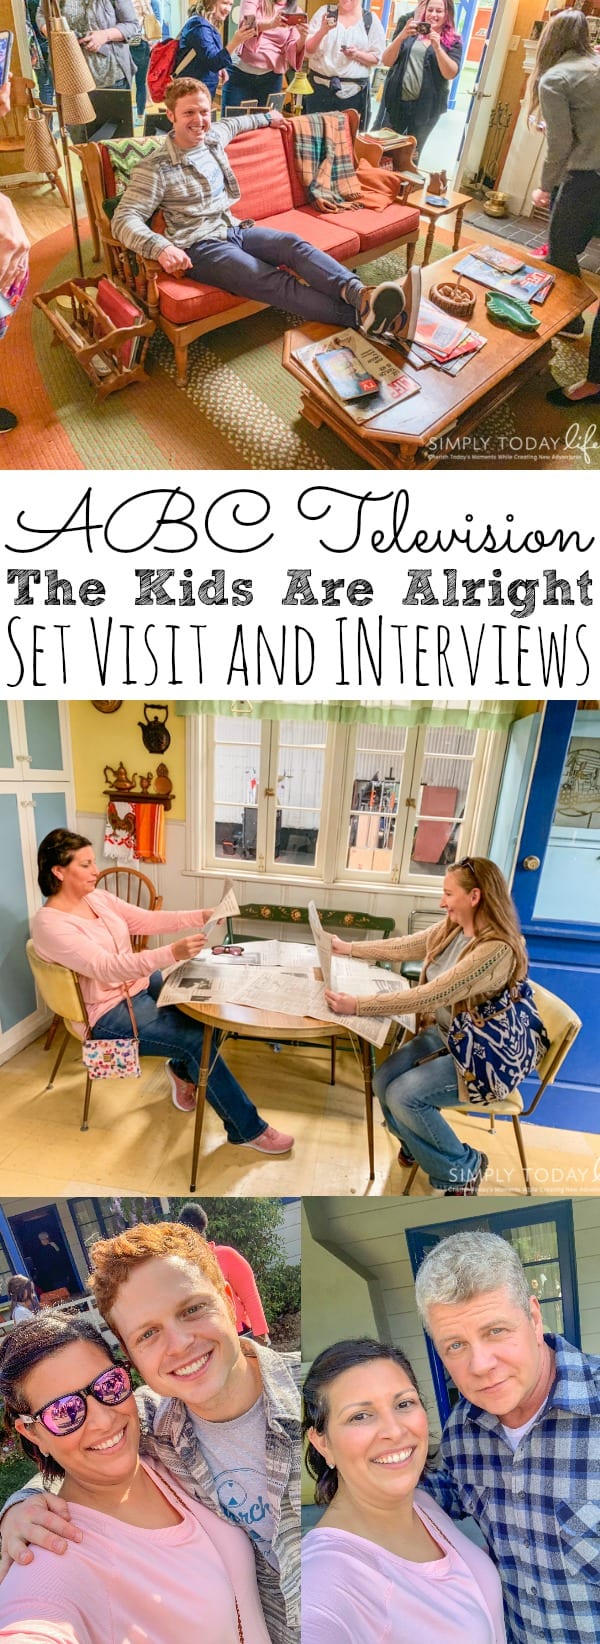 ABC Television The Kids Are Alright Set Visit